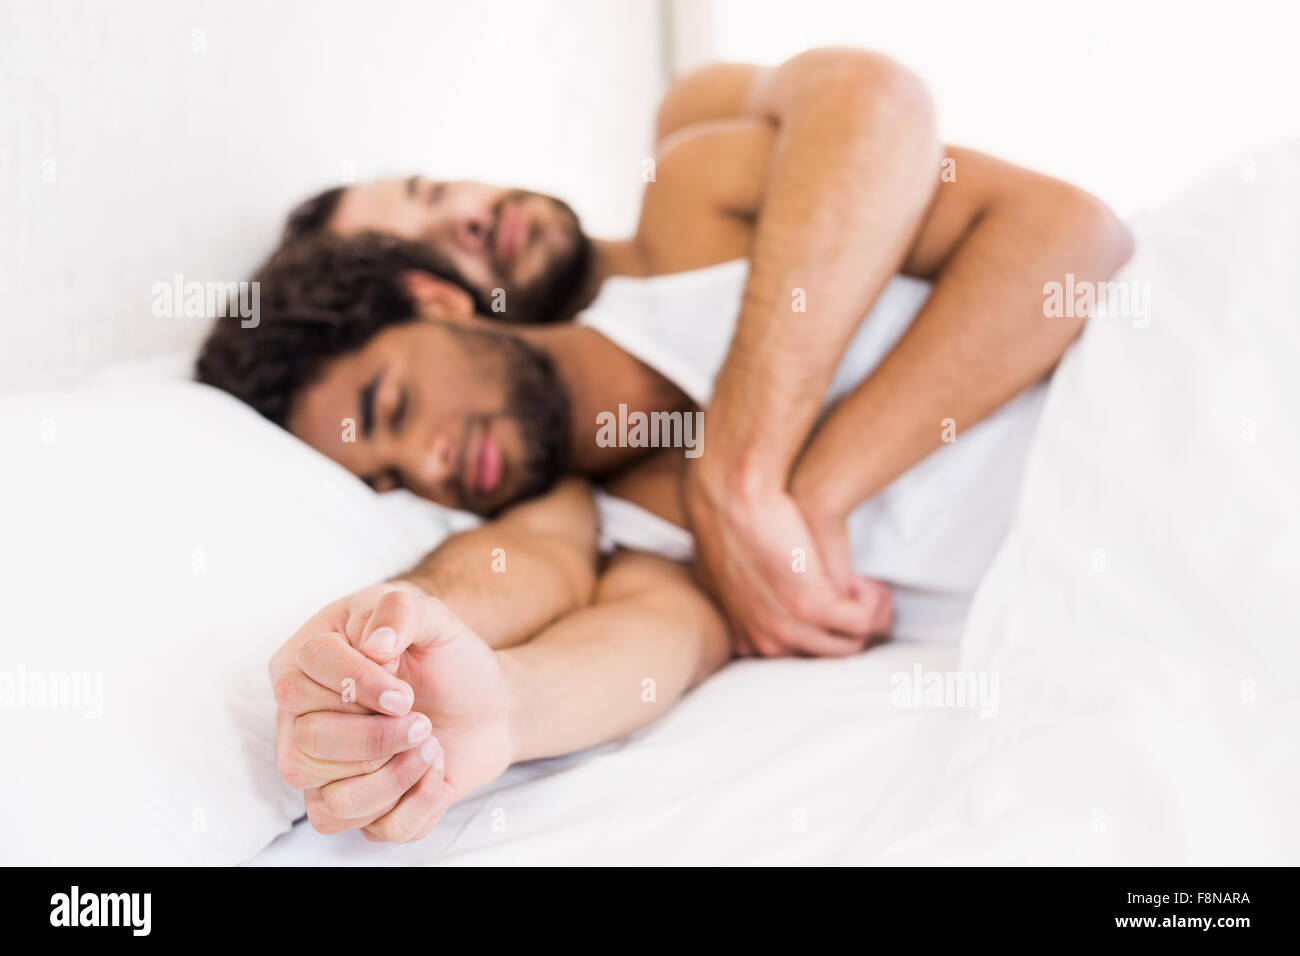 Gay couple sleeping together on bed Stock Photo